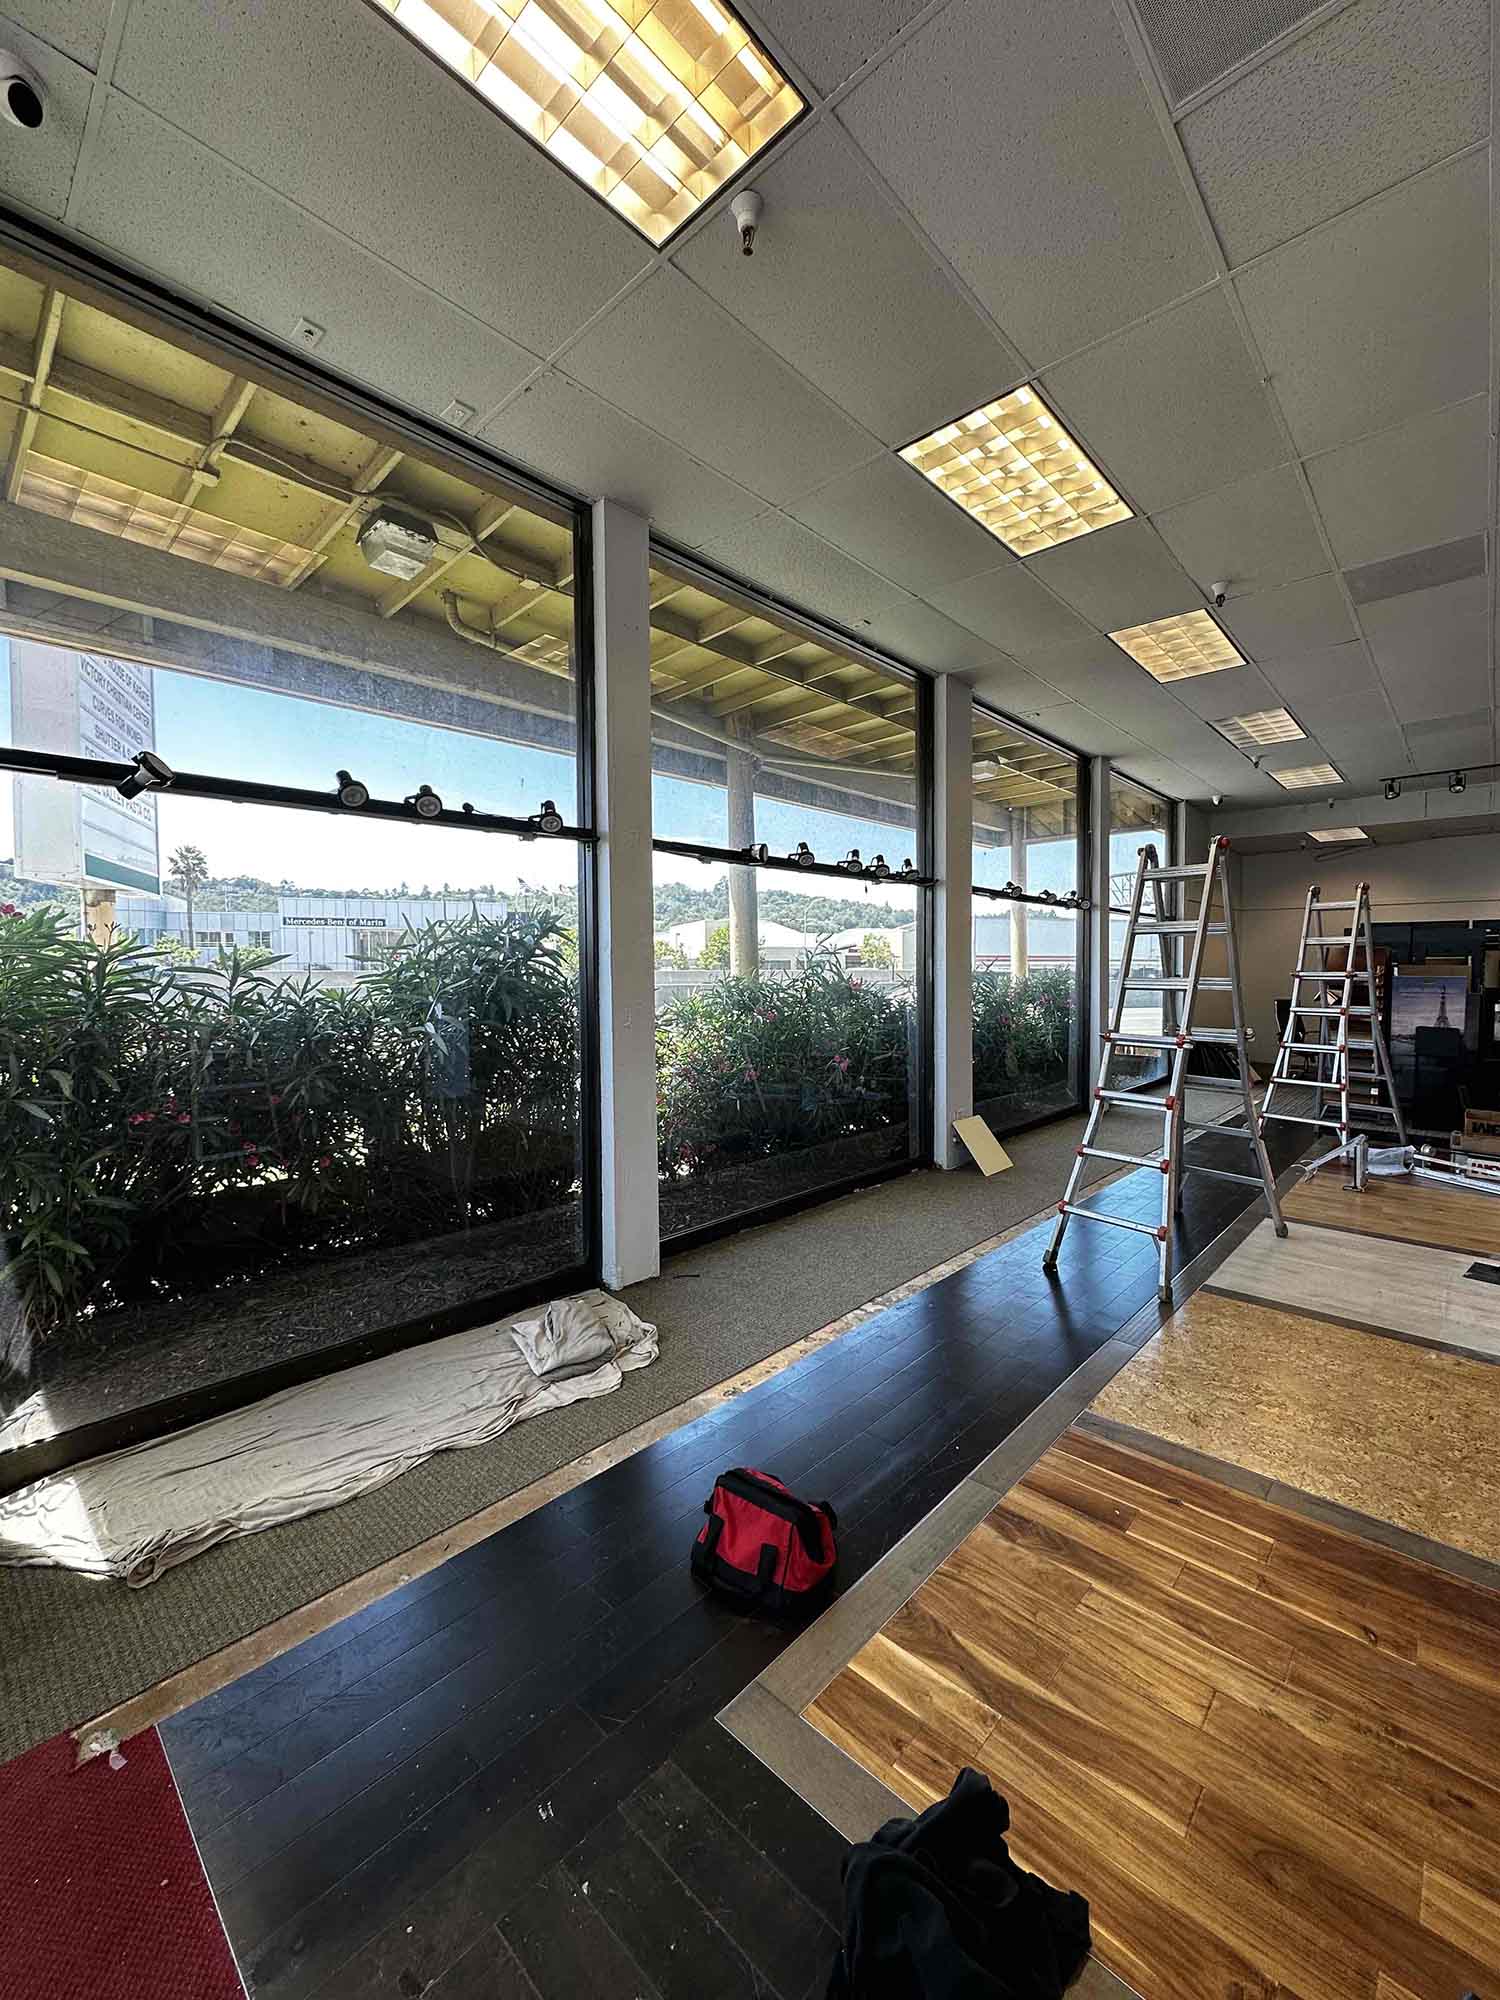 Sun Control Window Film for Marin, CA Businesses. Installed by ClimatePro.